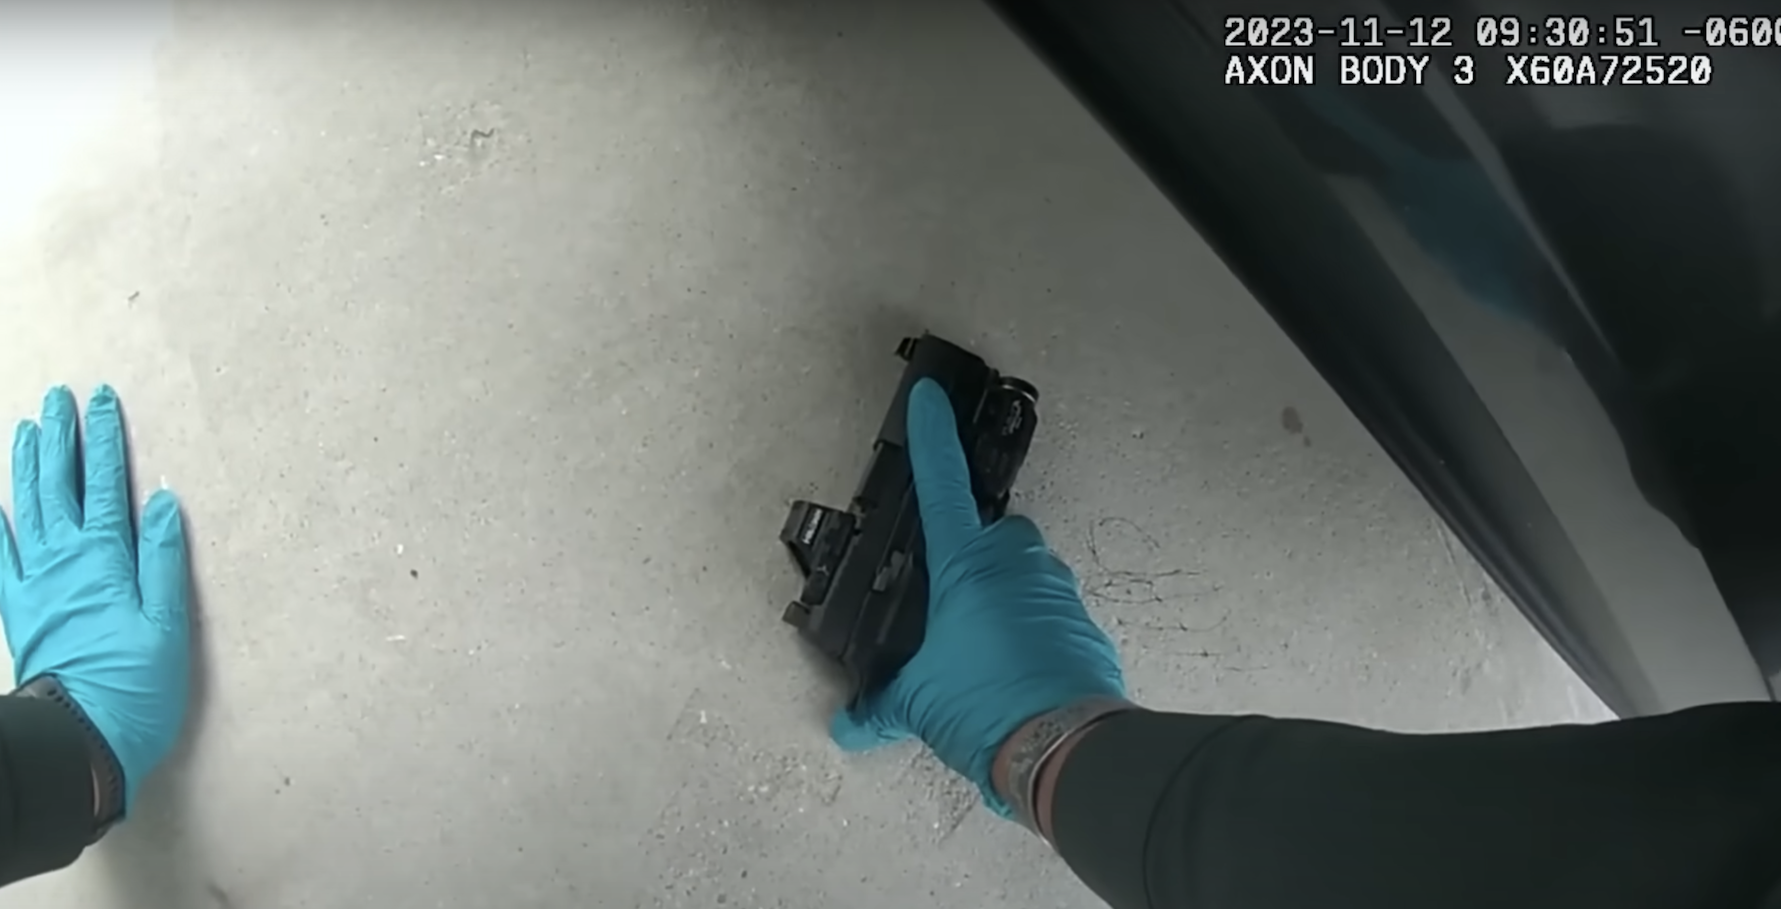 An image from Jesse Hernandez's body cam footage